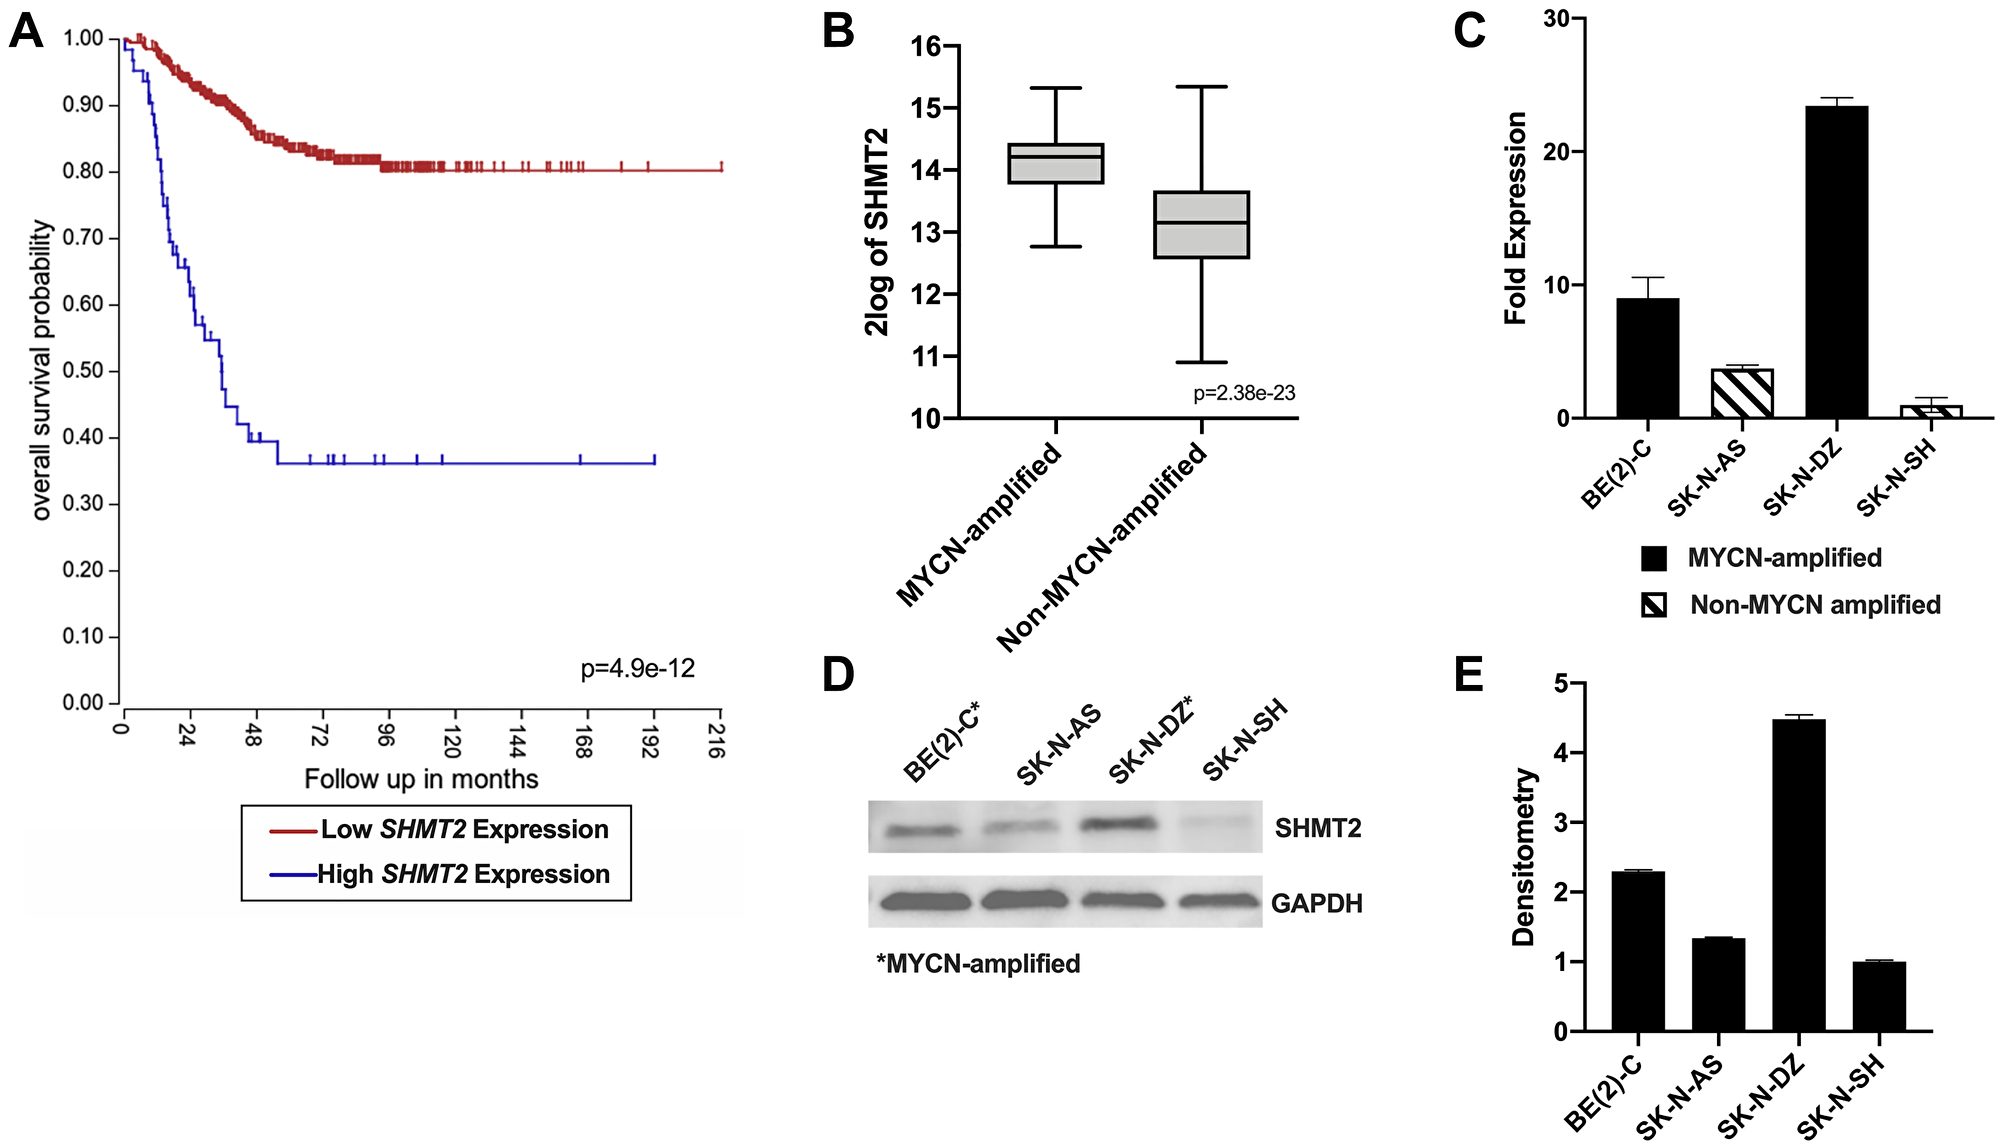 SHMT2 gene expression is associated with decreased survival and MYCN amplification in neuroblastoma patients.